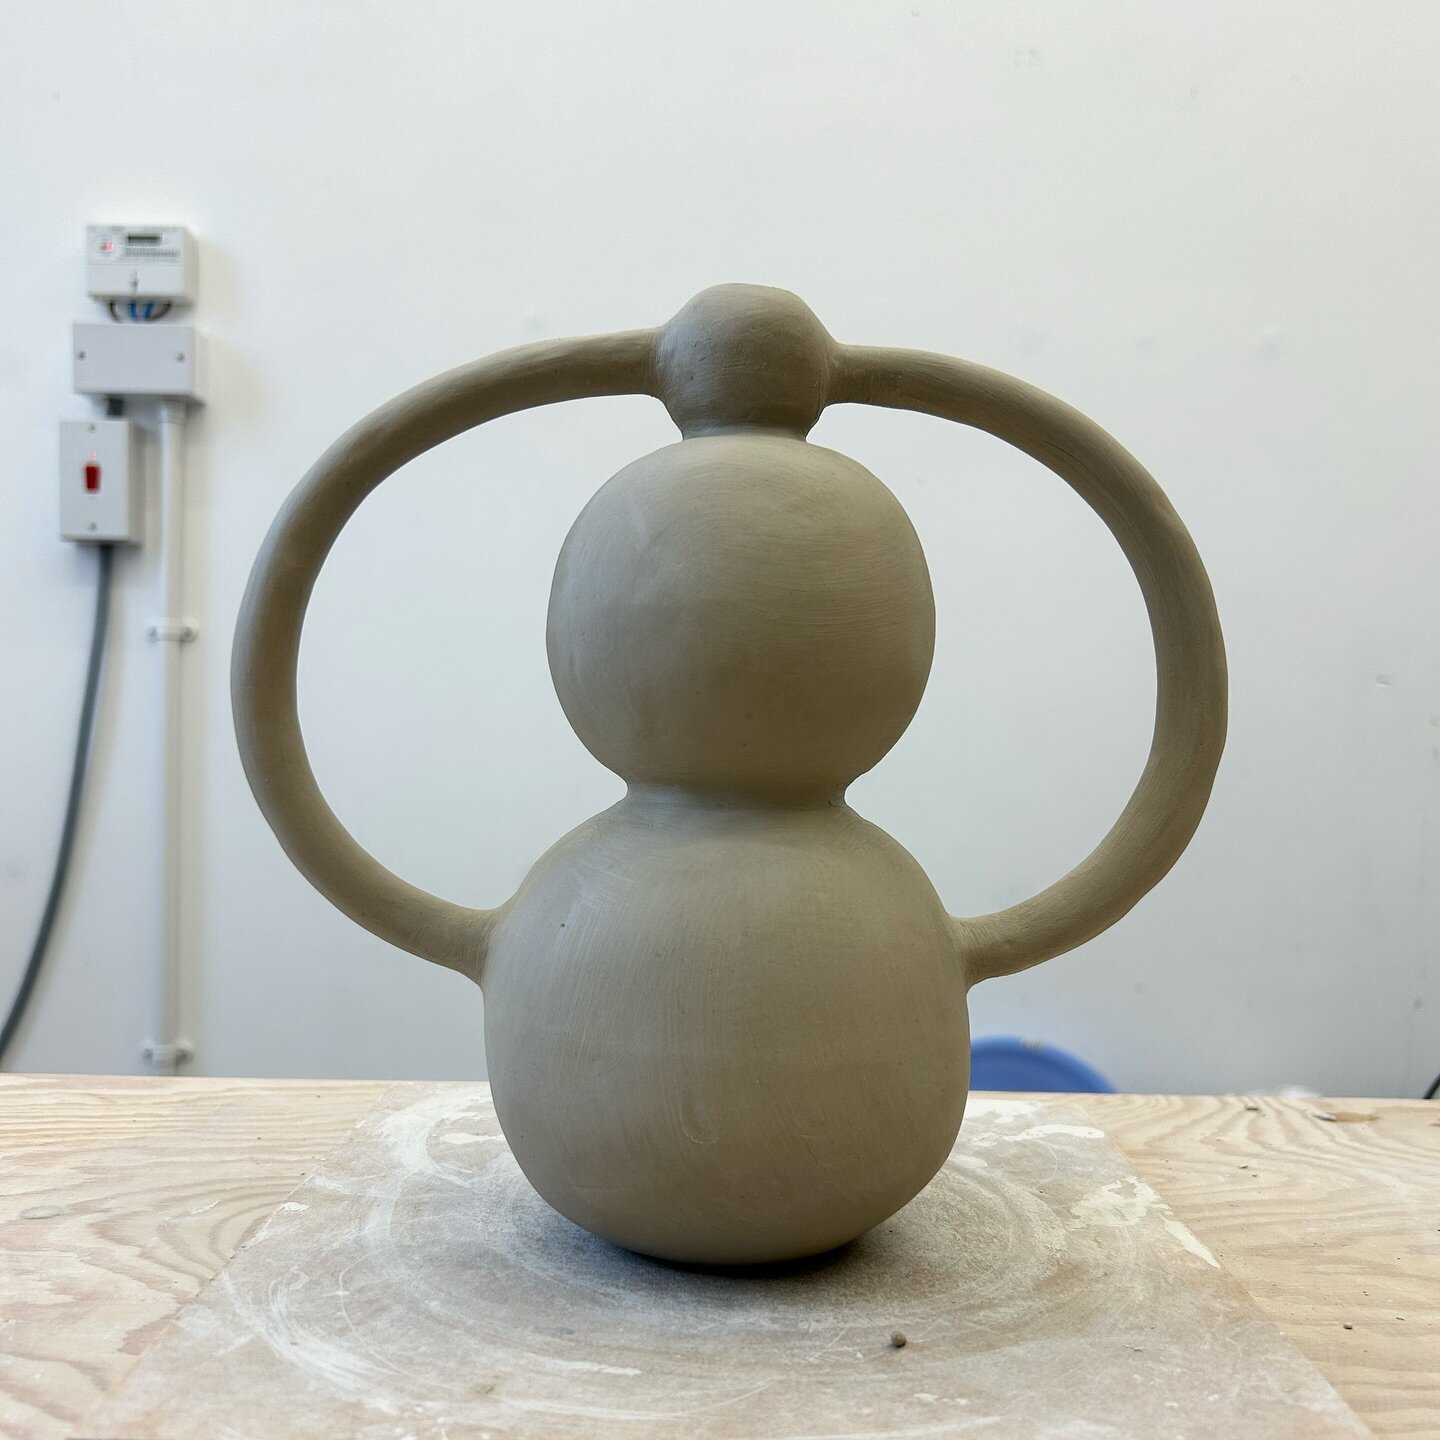 A silly pot in progress, inspired by the bulbous shapes and big handles of Dunmore Pottery🏺(or a grumpy snowman?)